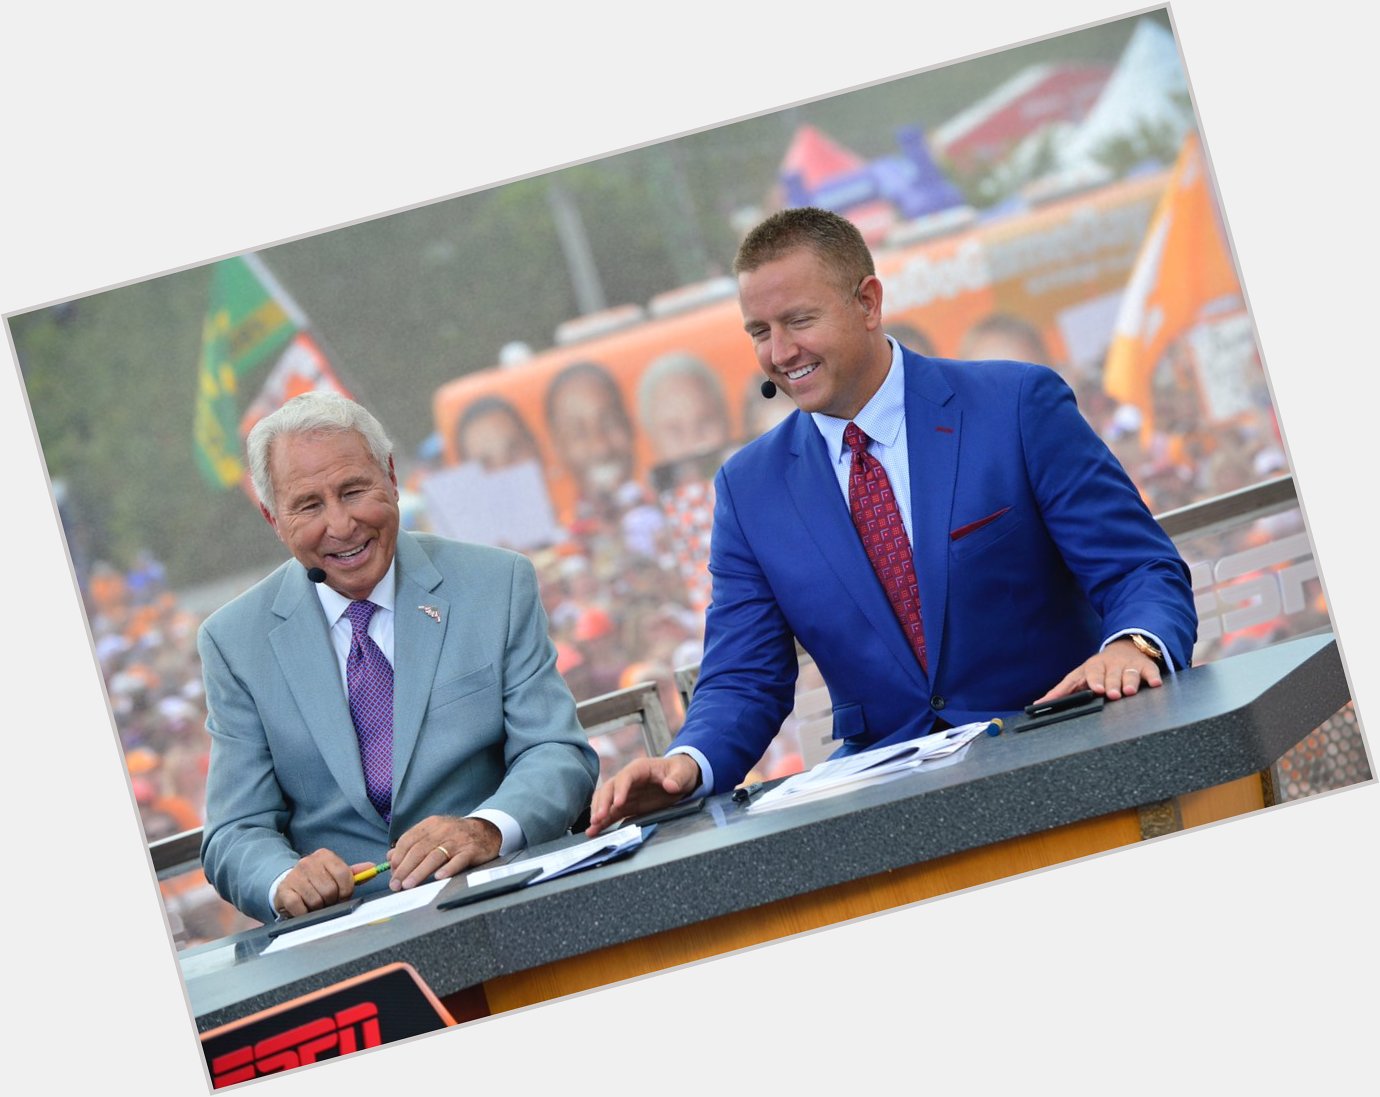 We\d like to wish a happy 82nd birthday to our good friend Lee Corso! 